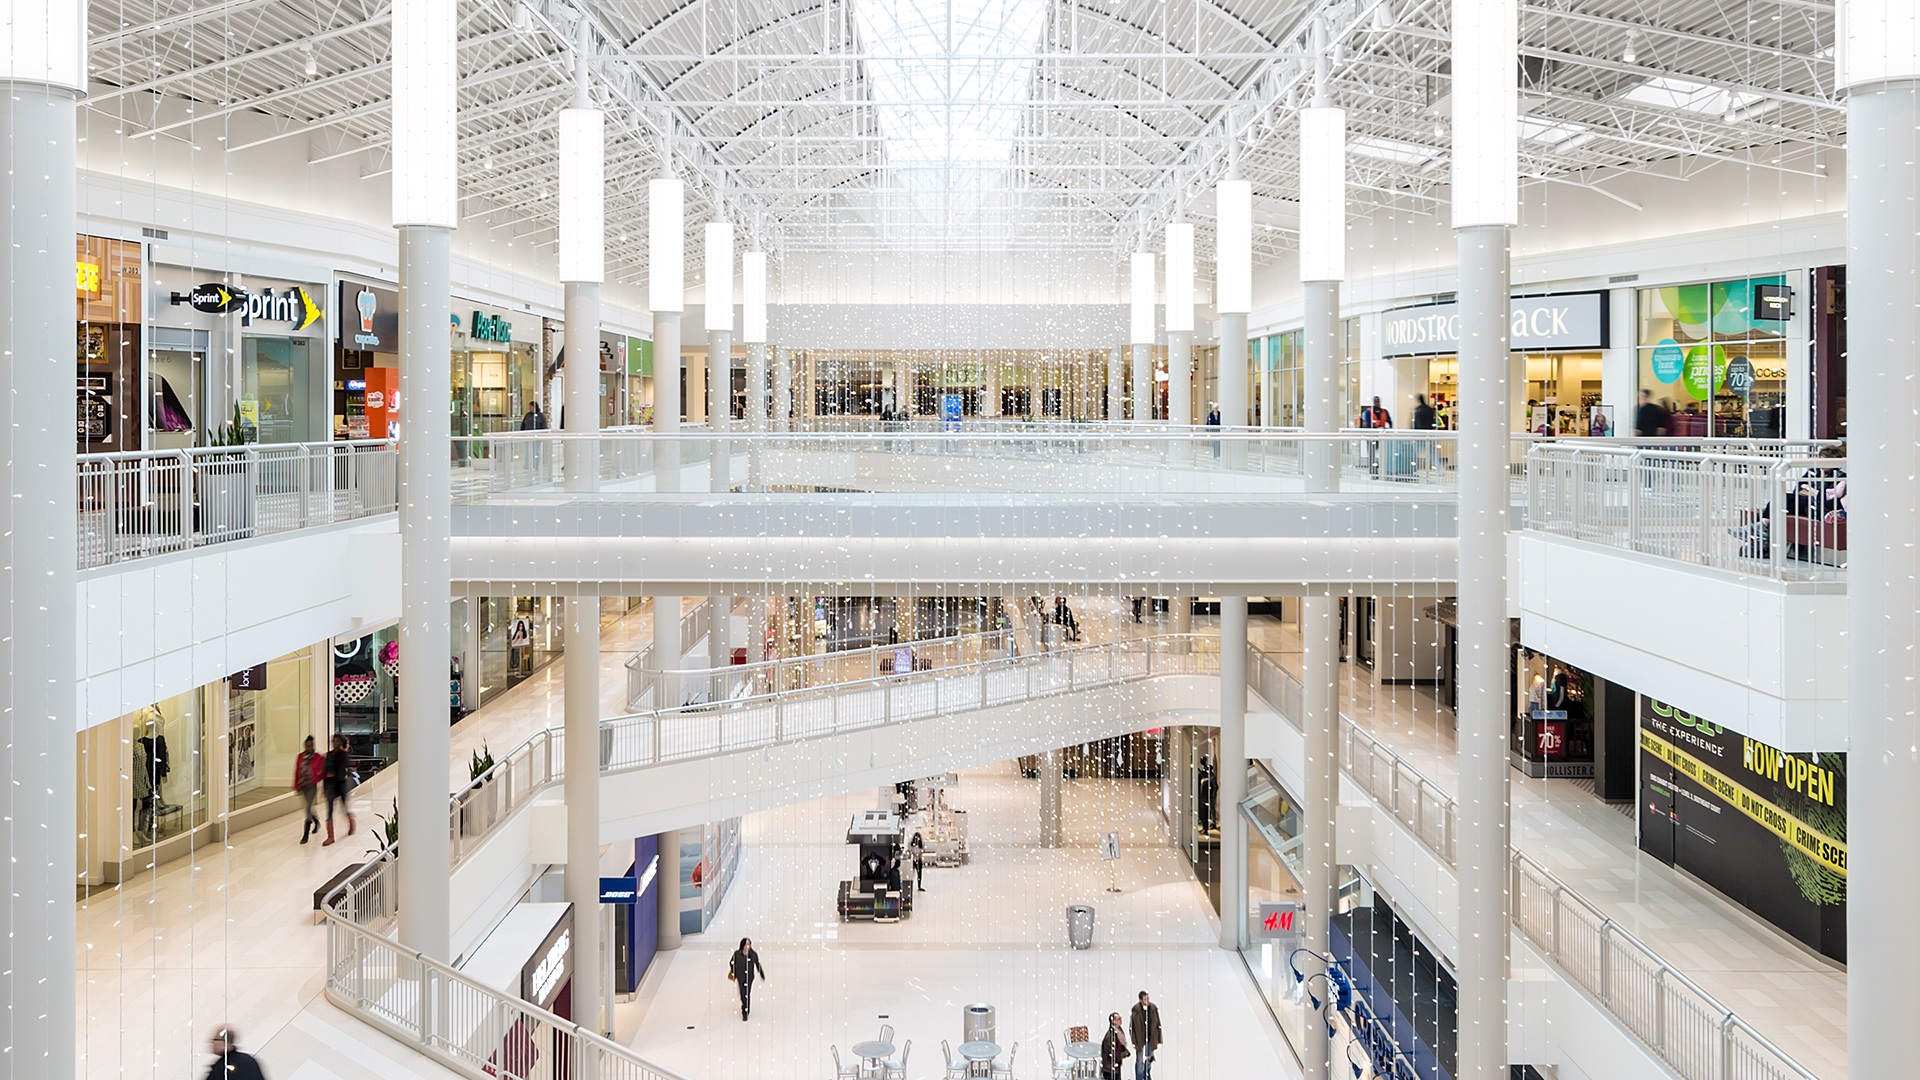 Plan Your Trip > Hours + Directions | Mall of America